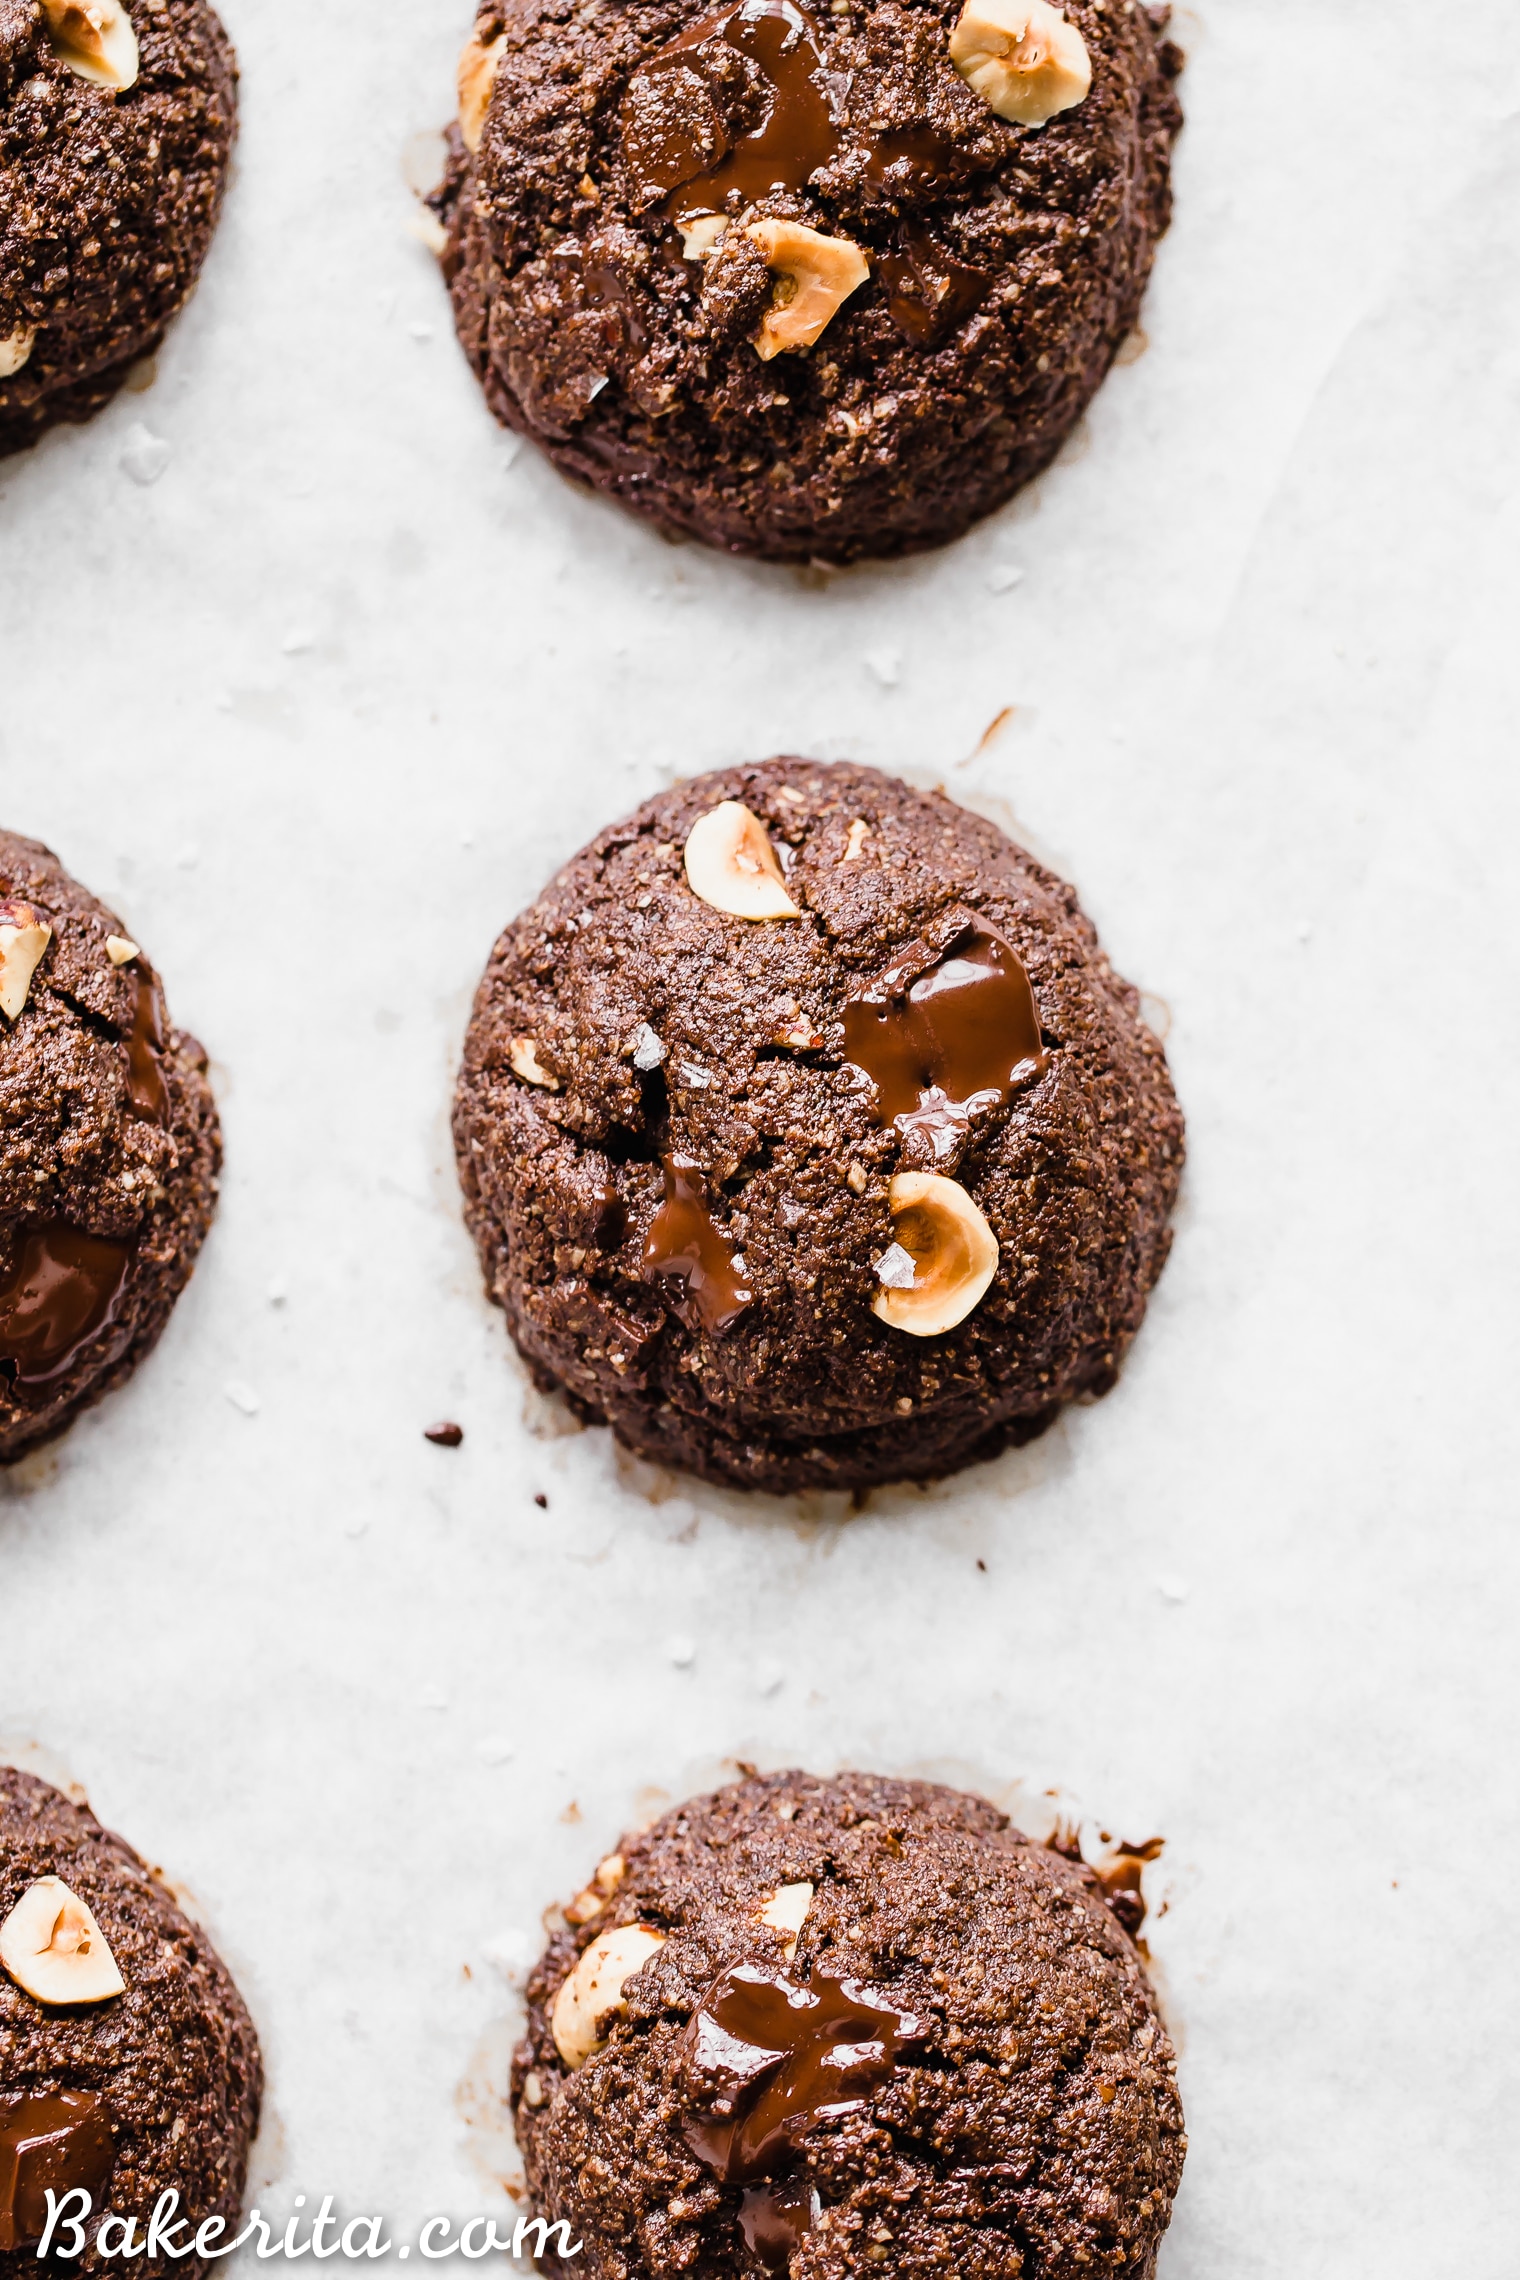 These Double Chocolate Hazelnut Cookies are soft, fudgy, and incredibly chocolatey! These irresistible cookies are loaded with melty dark chocolate chunks and crunchy hazelnuts, and you'd never guess they're gluten-free, paleo, and vegan. 